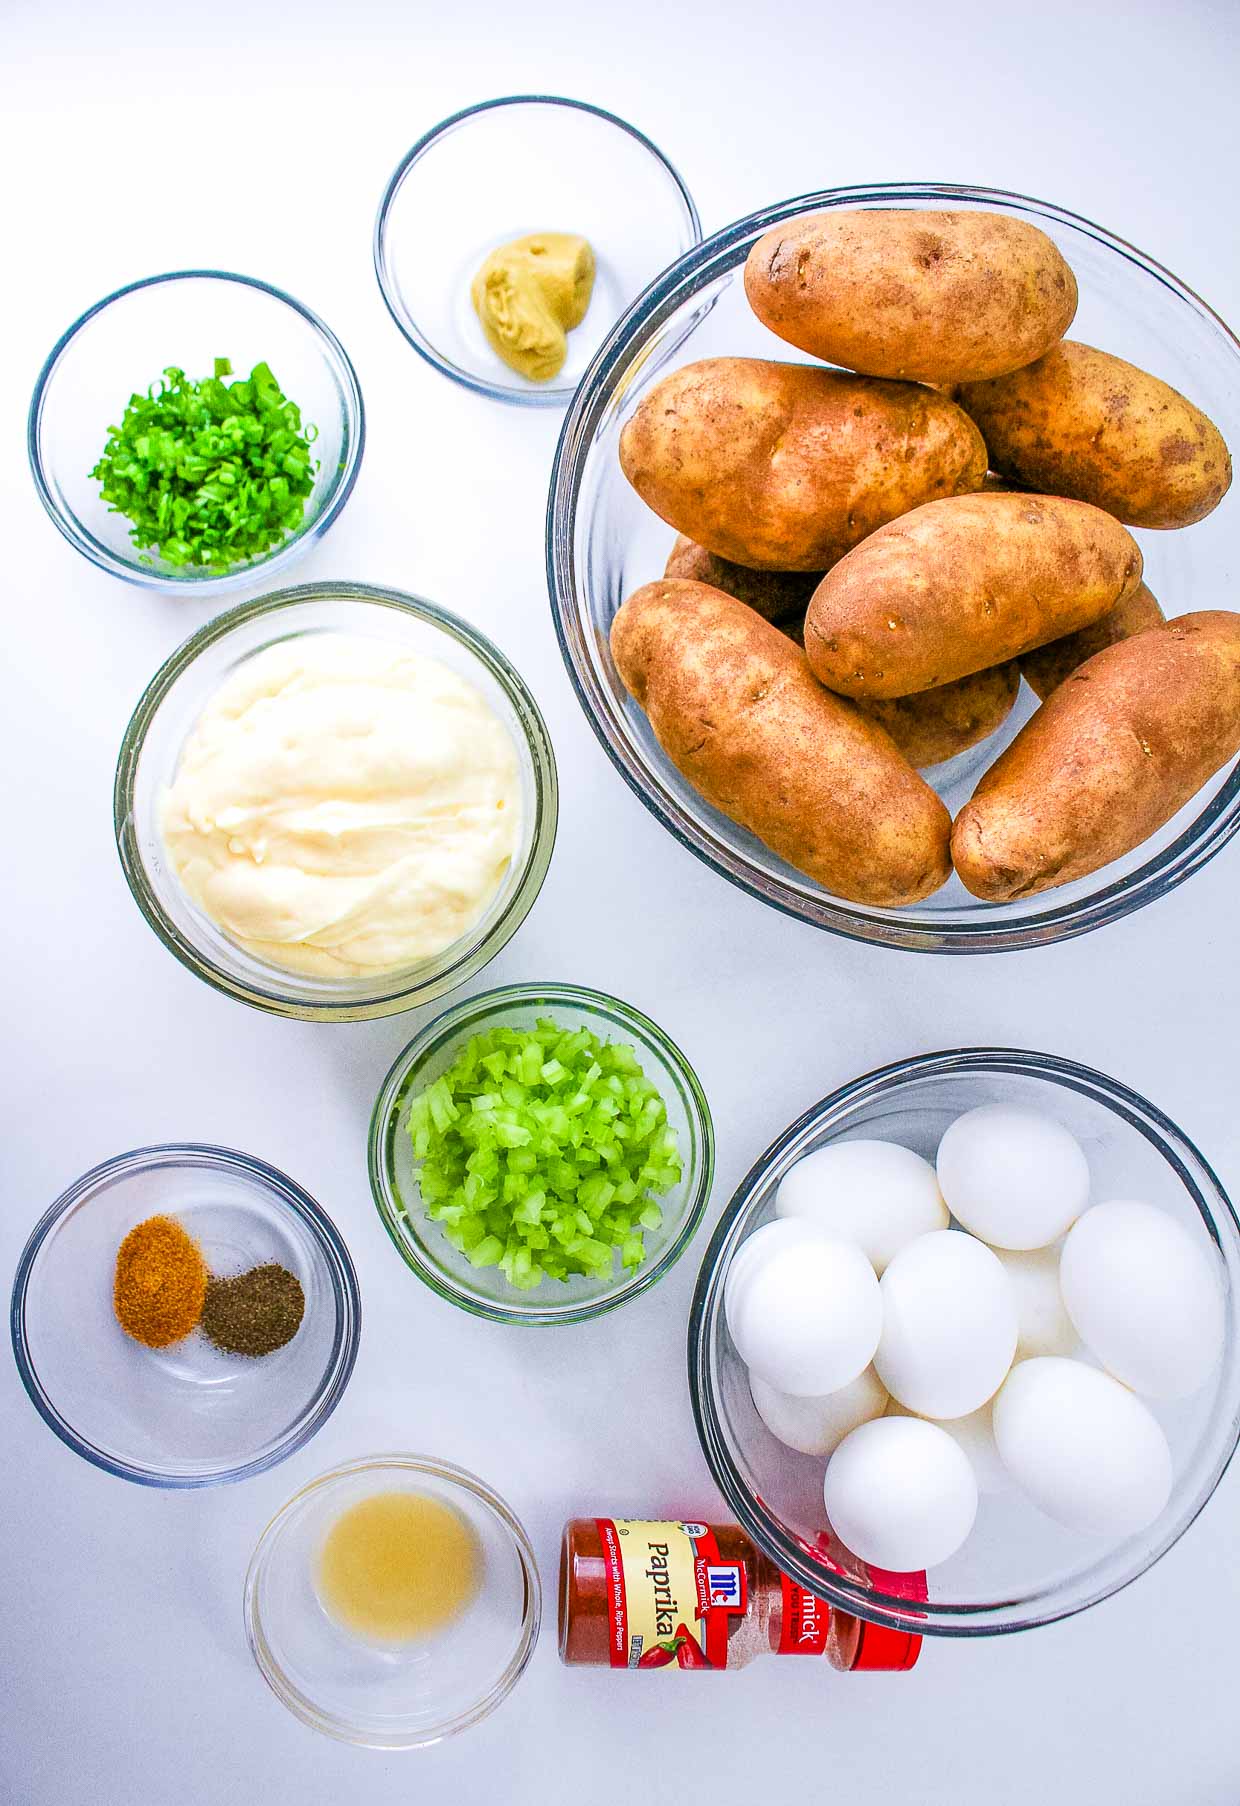 Ingredients for egg potato salad preparation on a white surface.